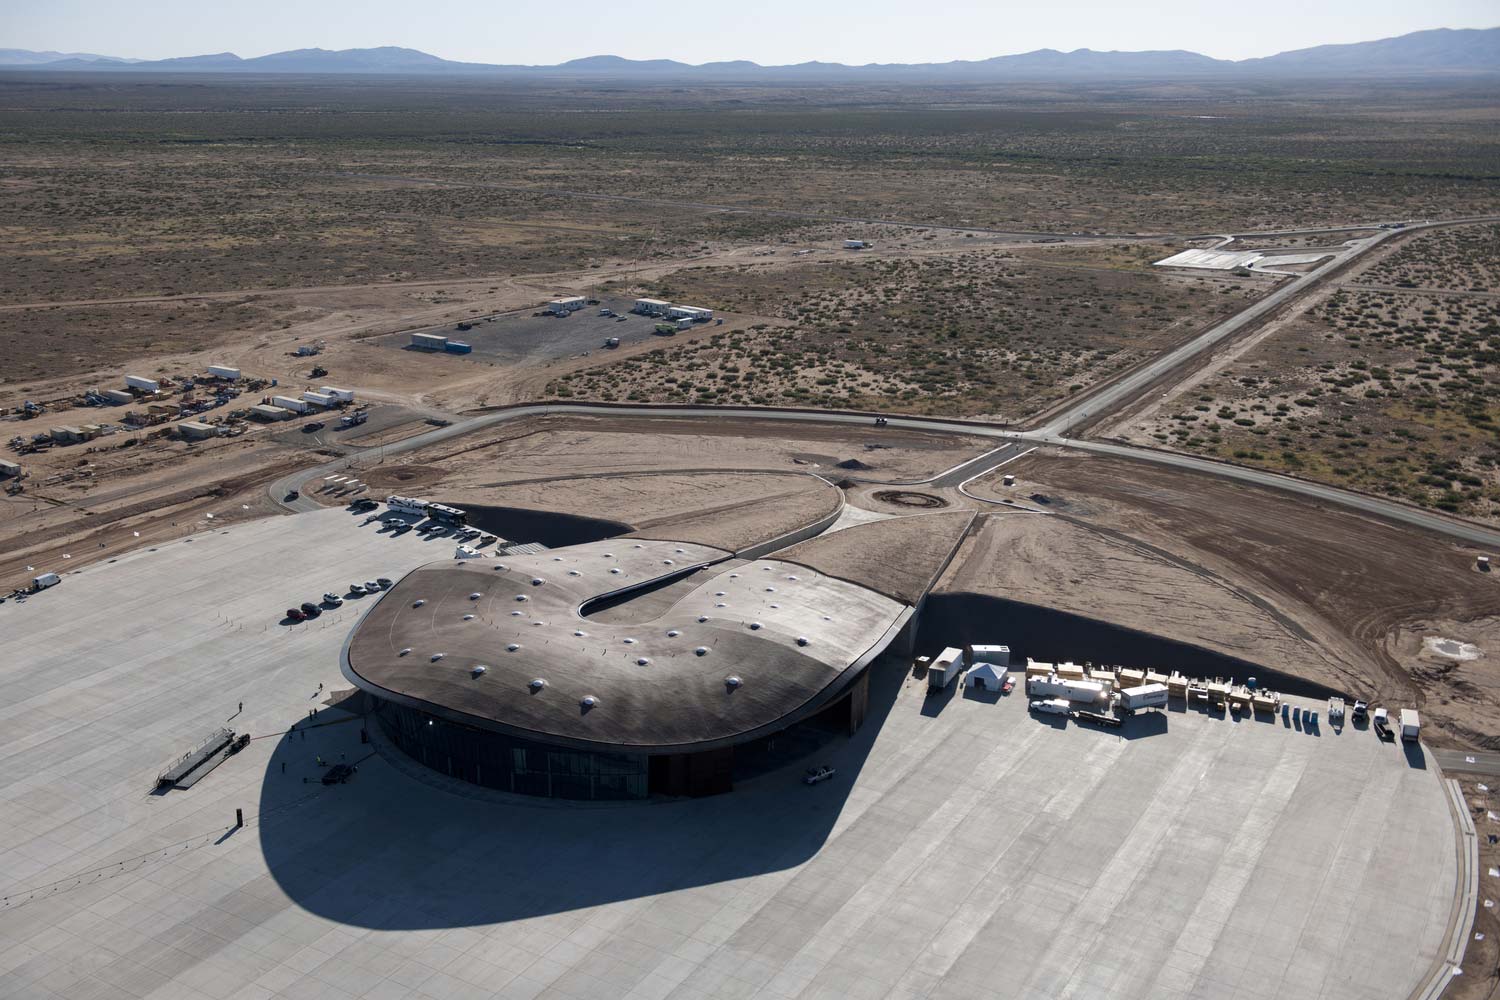 TheTake_Foster_SpaceportAmerica_courtesy_FosterPartners_SMPCArchitects.jpg